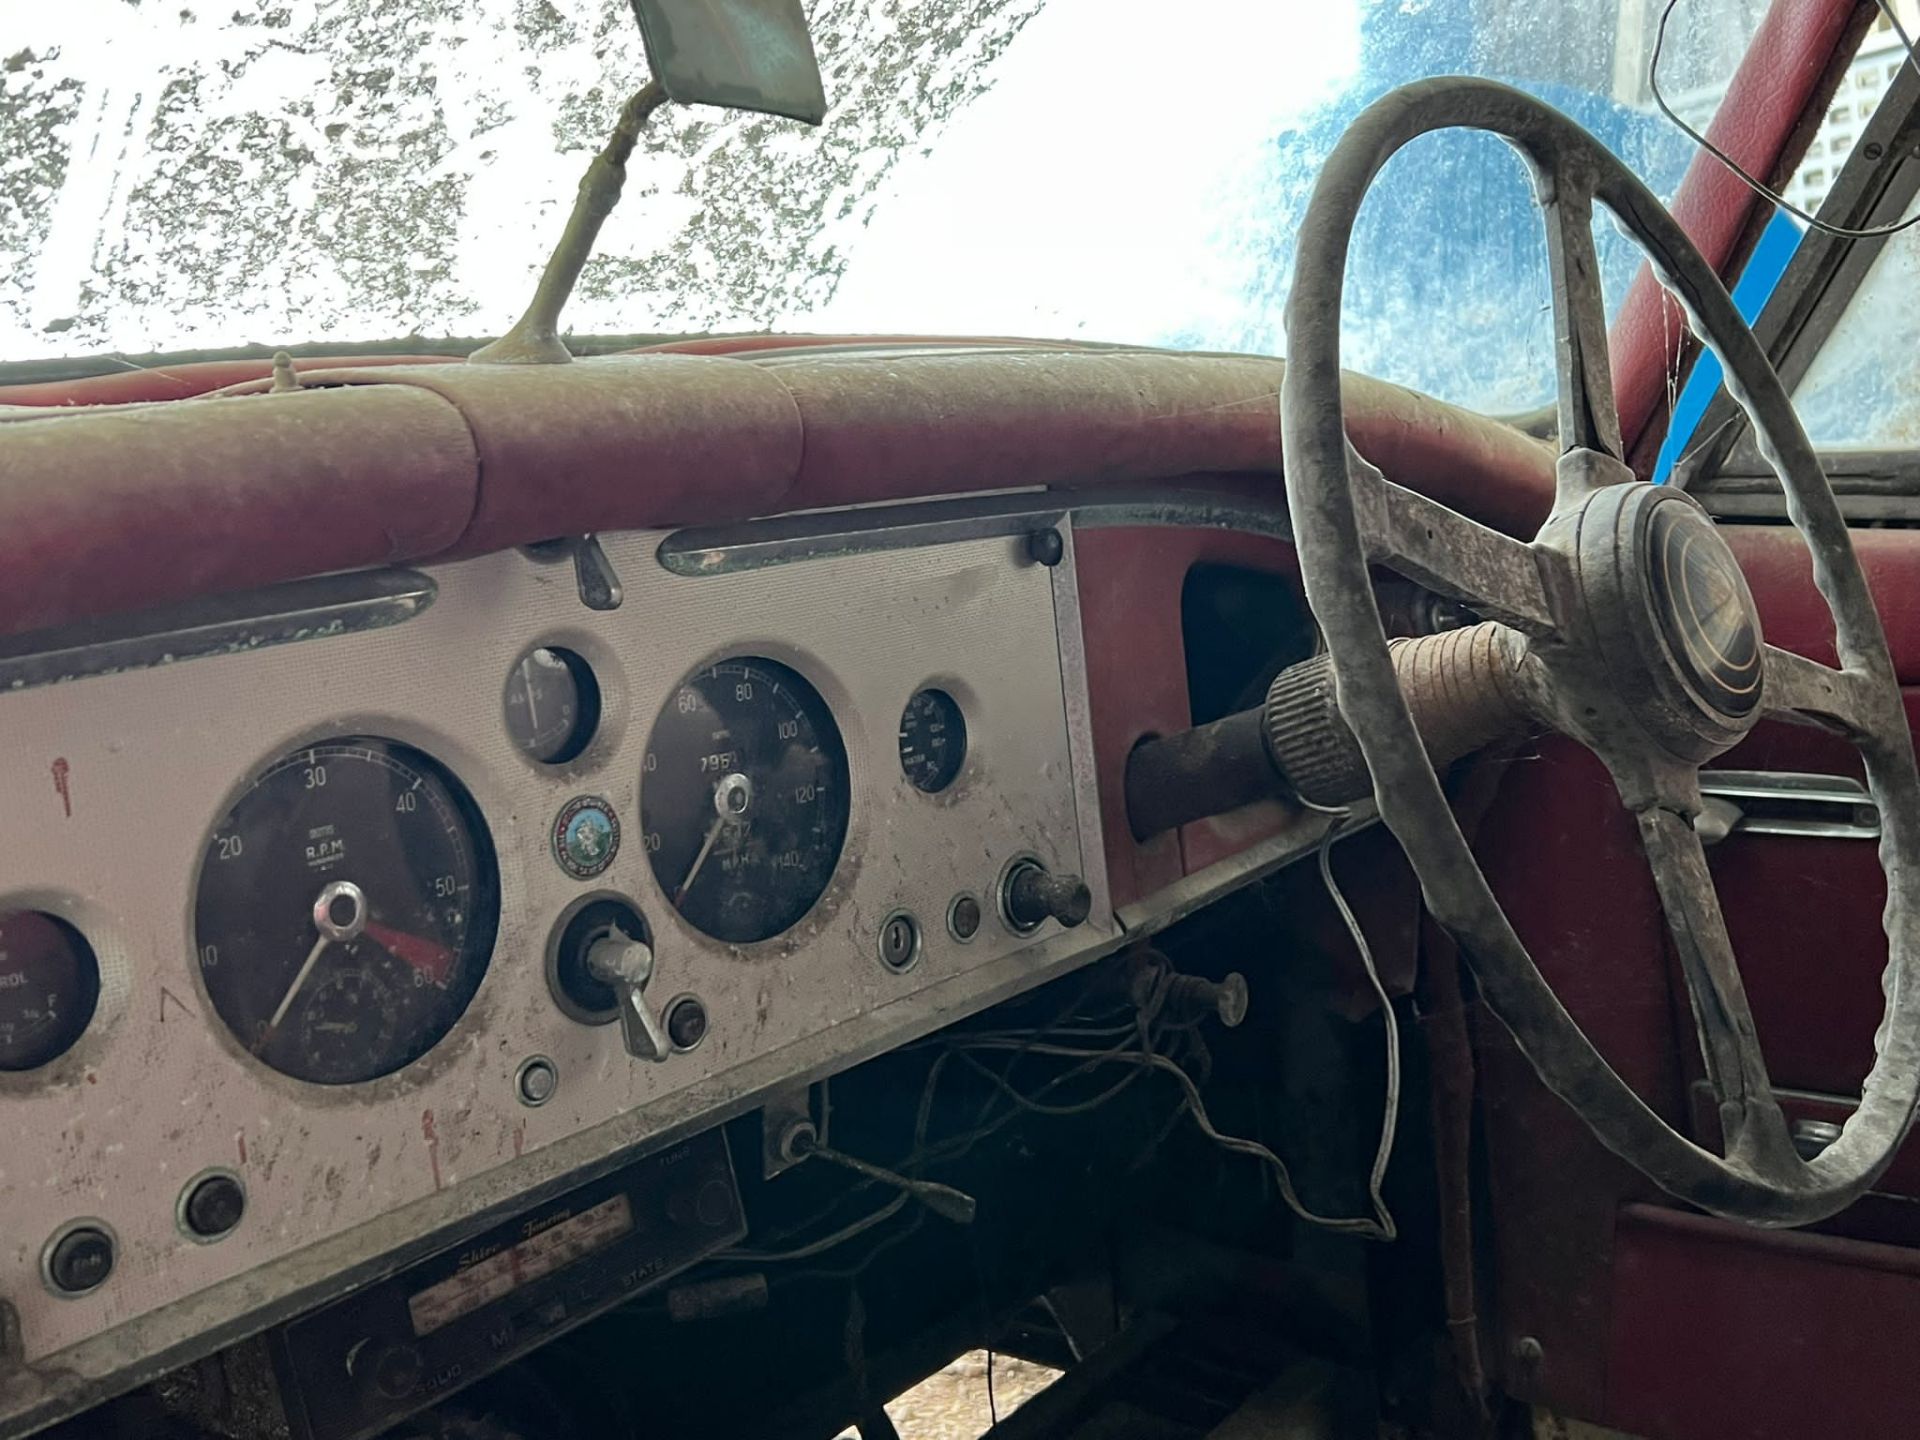 Jaguar XK150 3.4 Drop Head Coupe 1958 Barn Find. Matching numbers. - Image 7 of 27